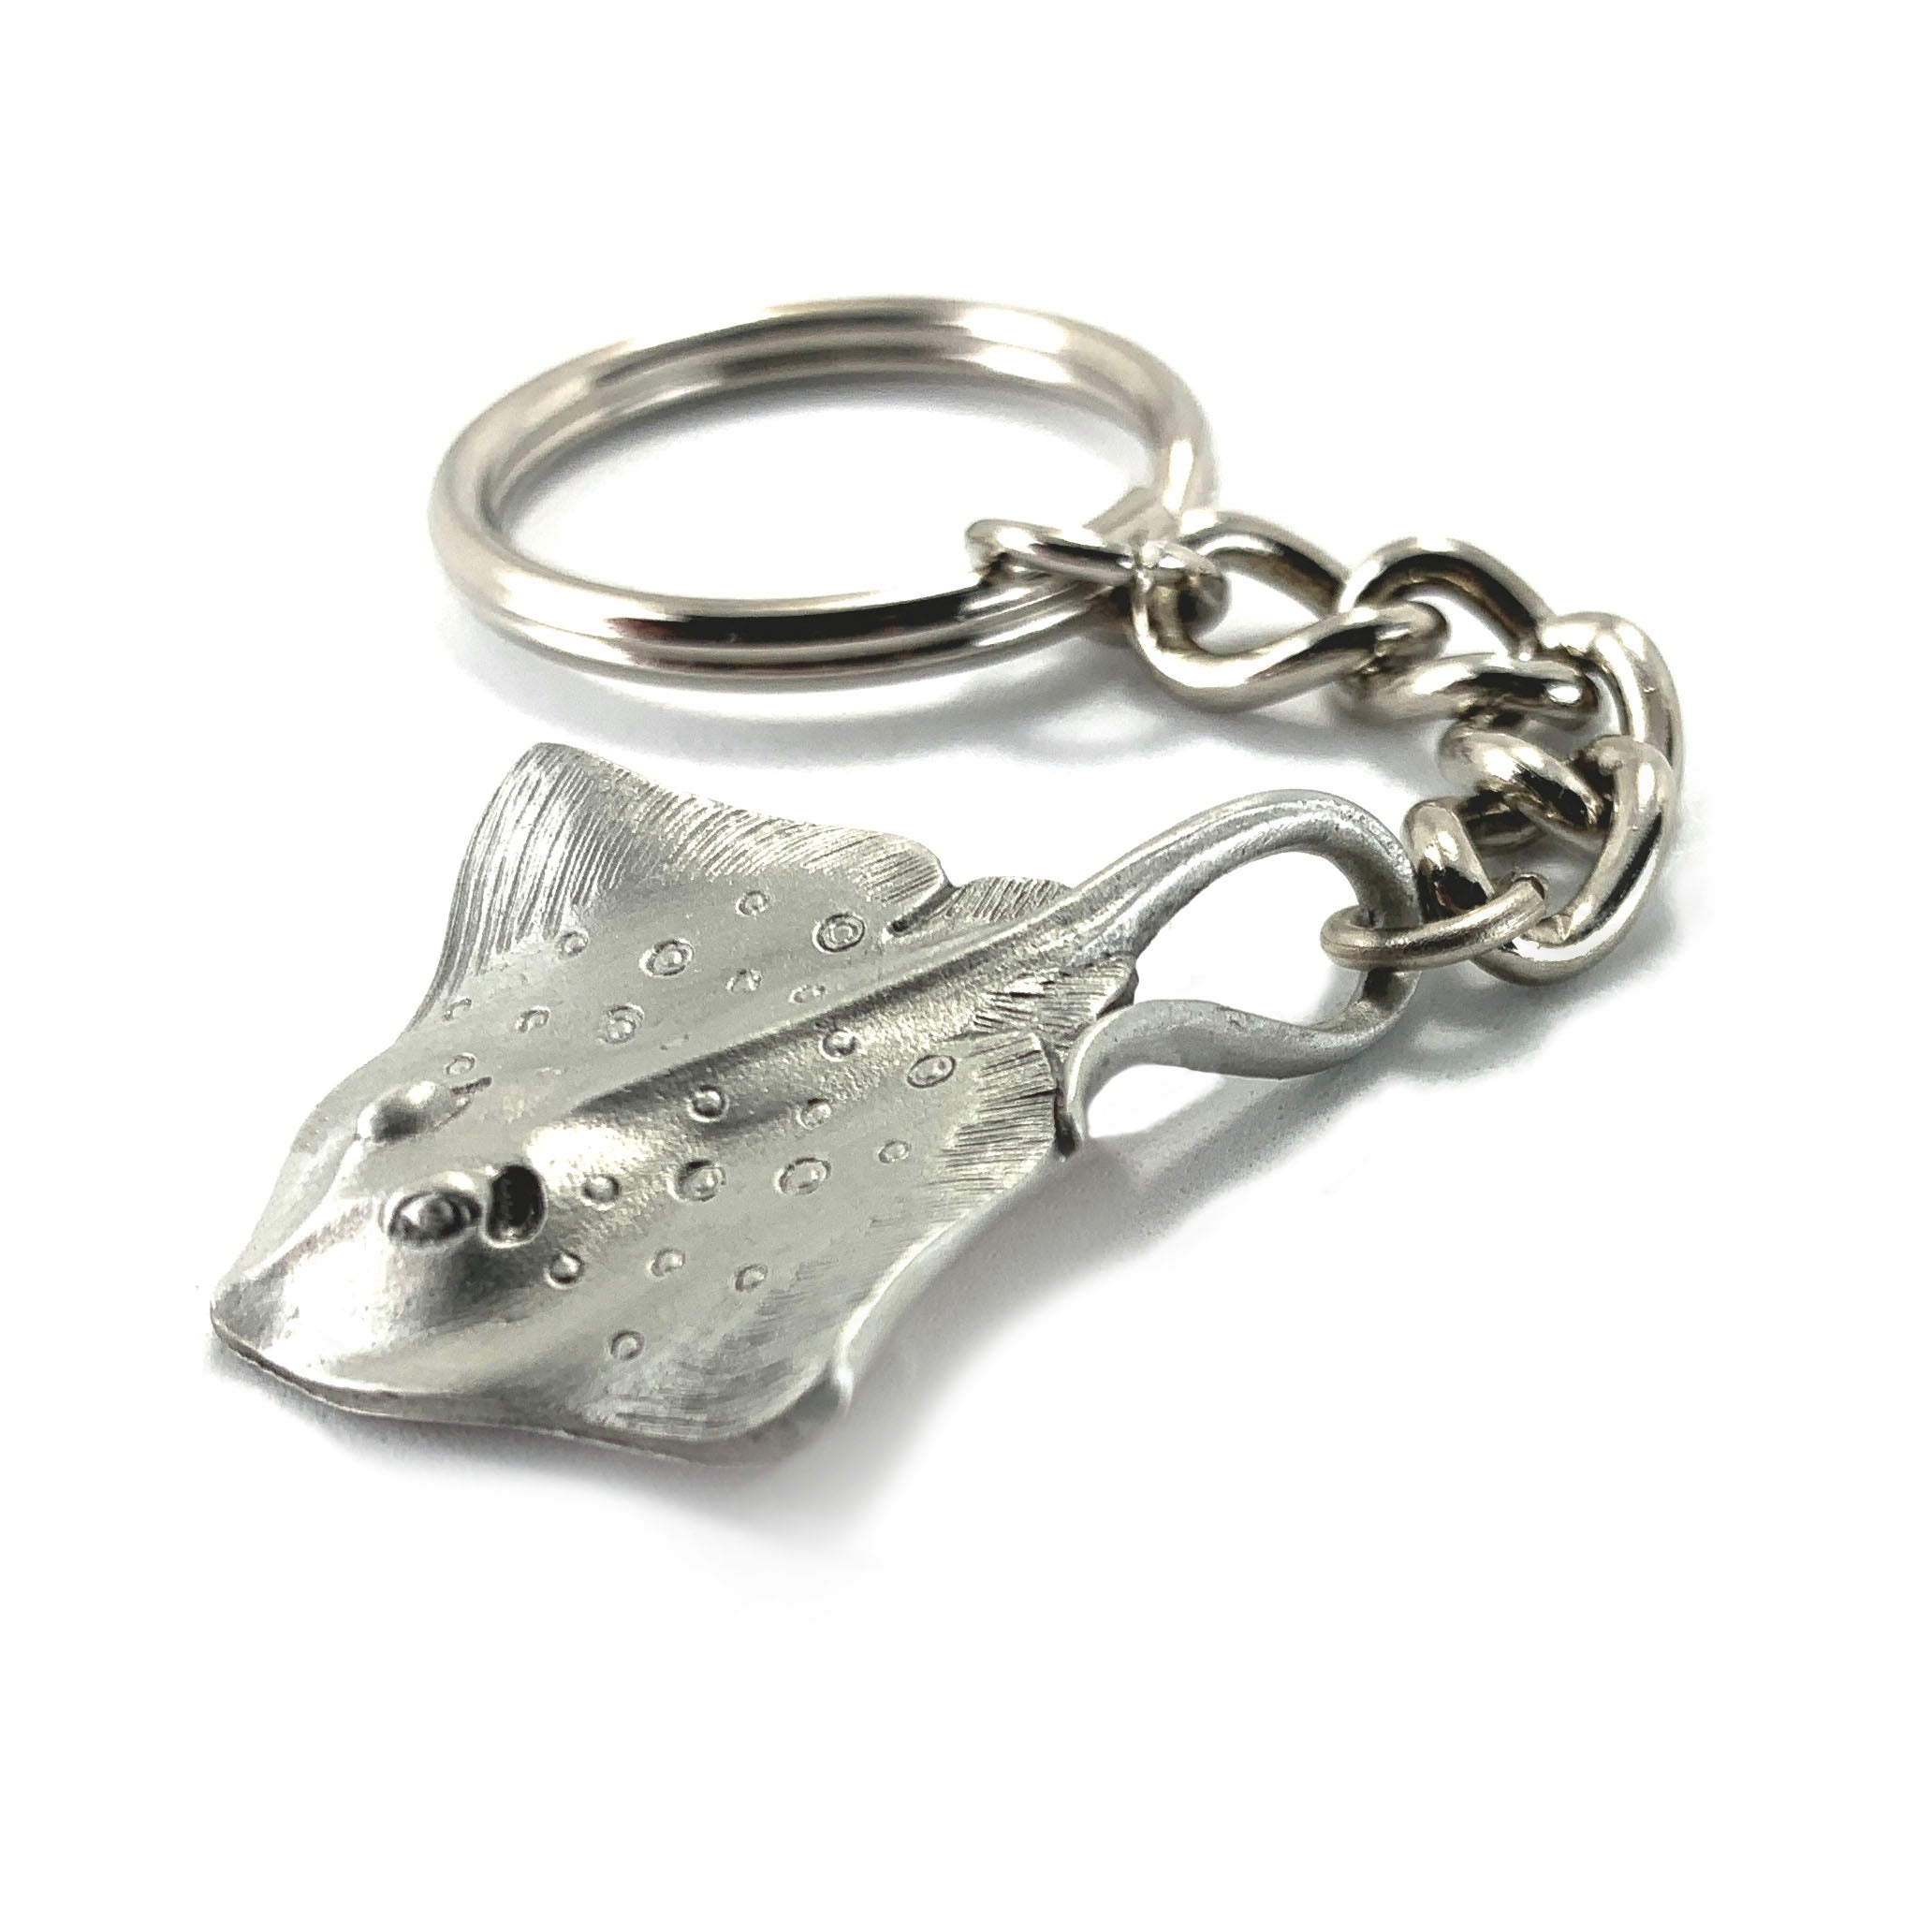 ANGELS REVERSIBLE HOME/AWAY JERSEY KEYCHAIN